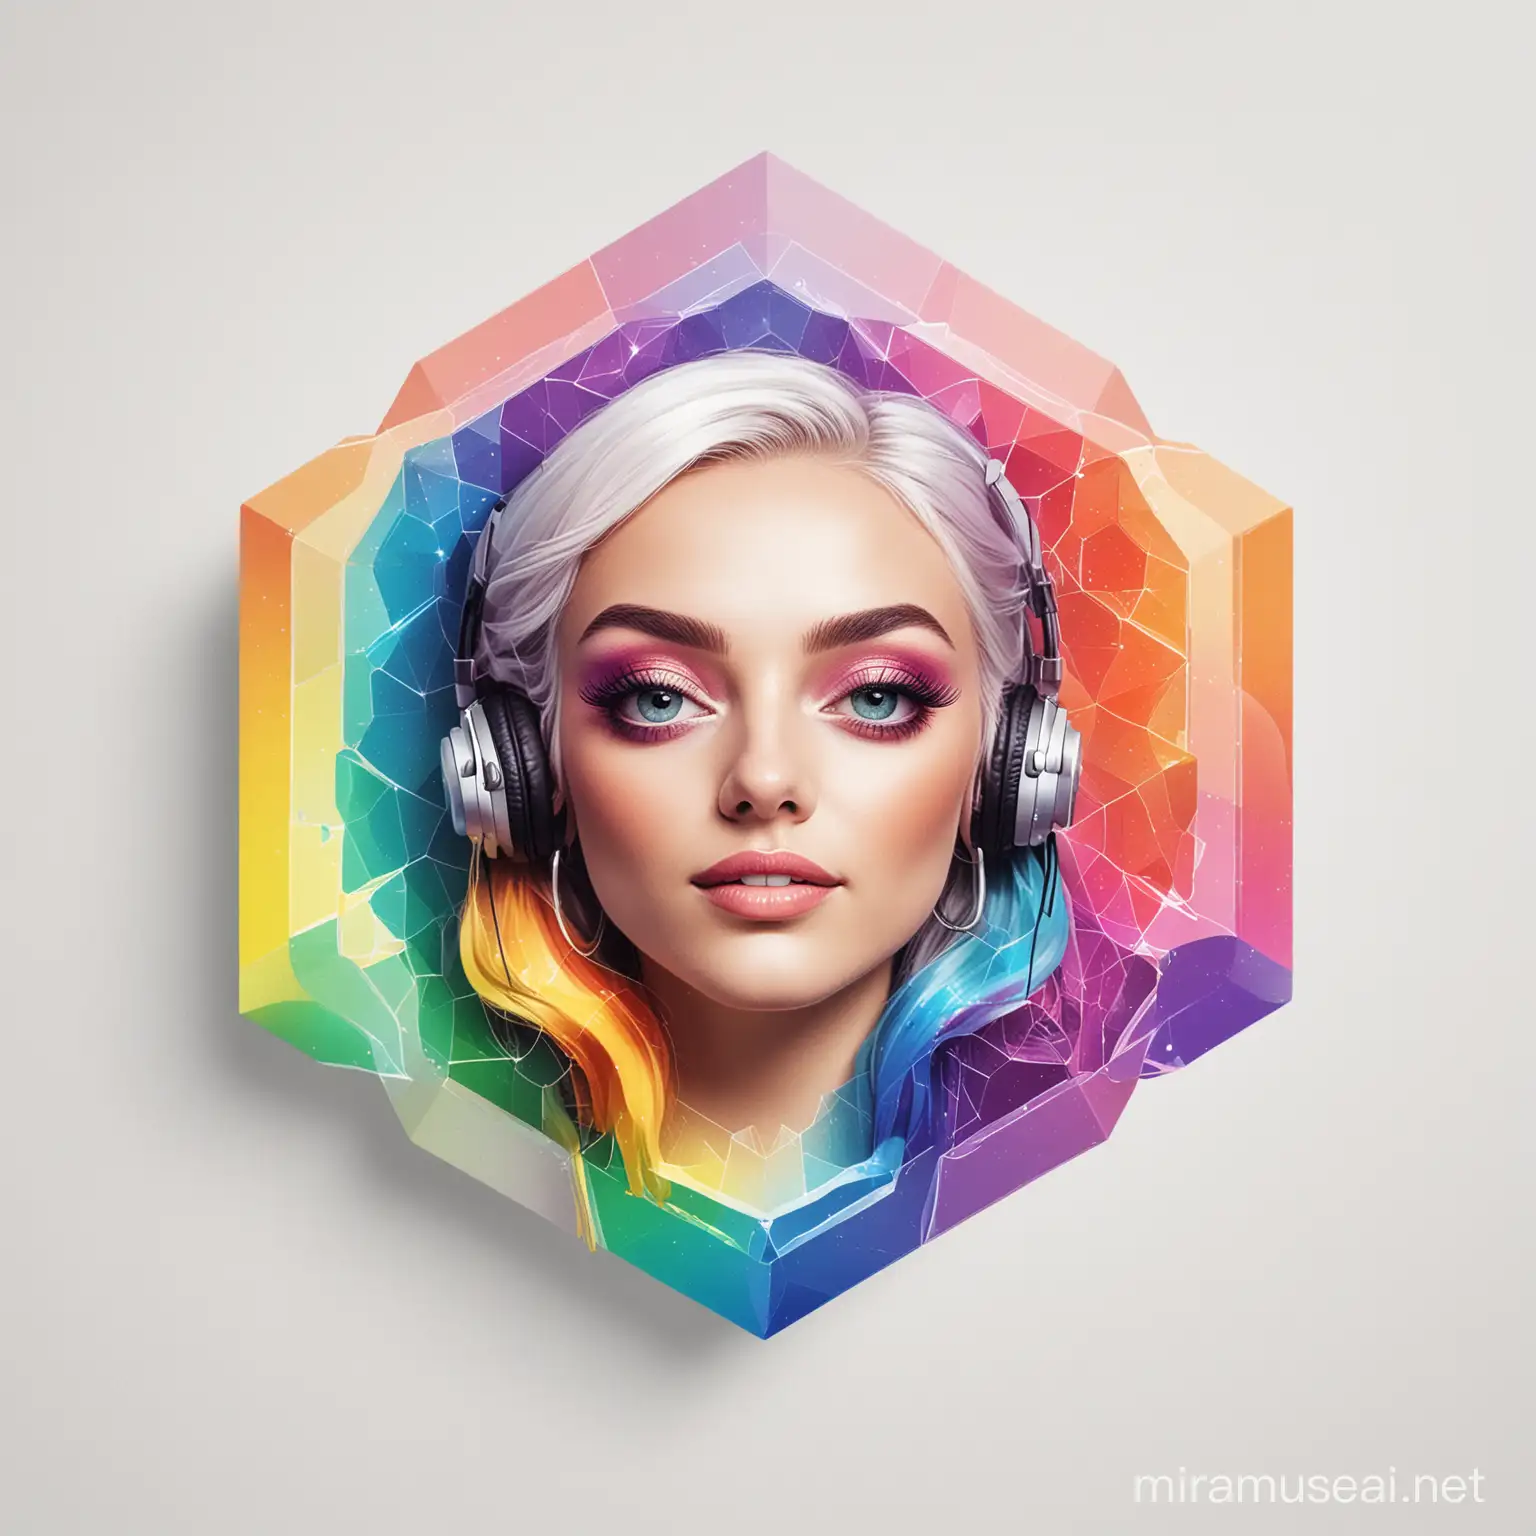 logo for a DJ, Hexagon shape with rainbow gradient, white background, words "Lady Alorum"-A Collection of AI-Generated Images and Artwork